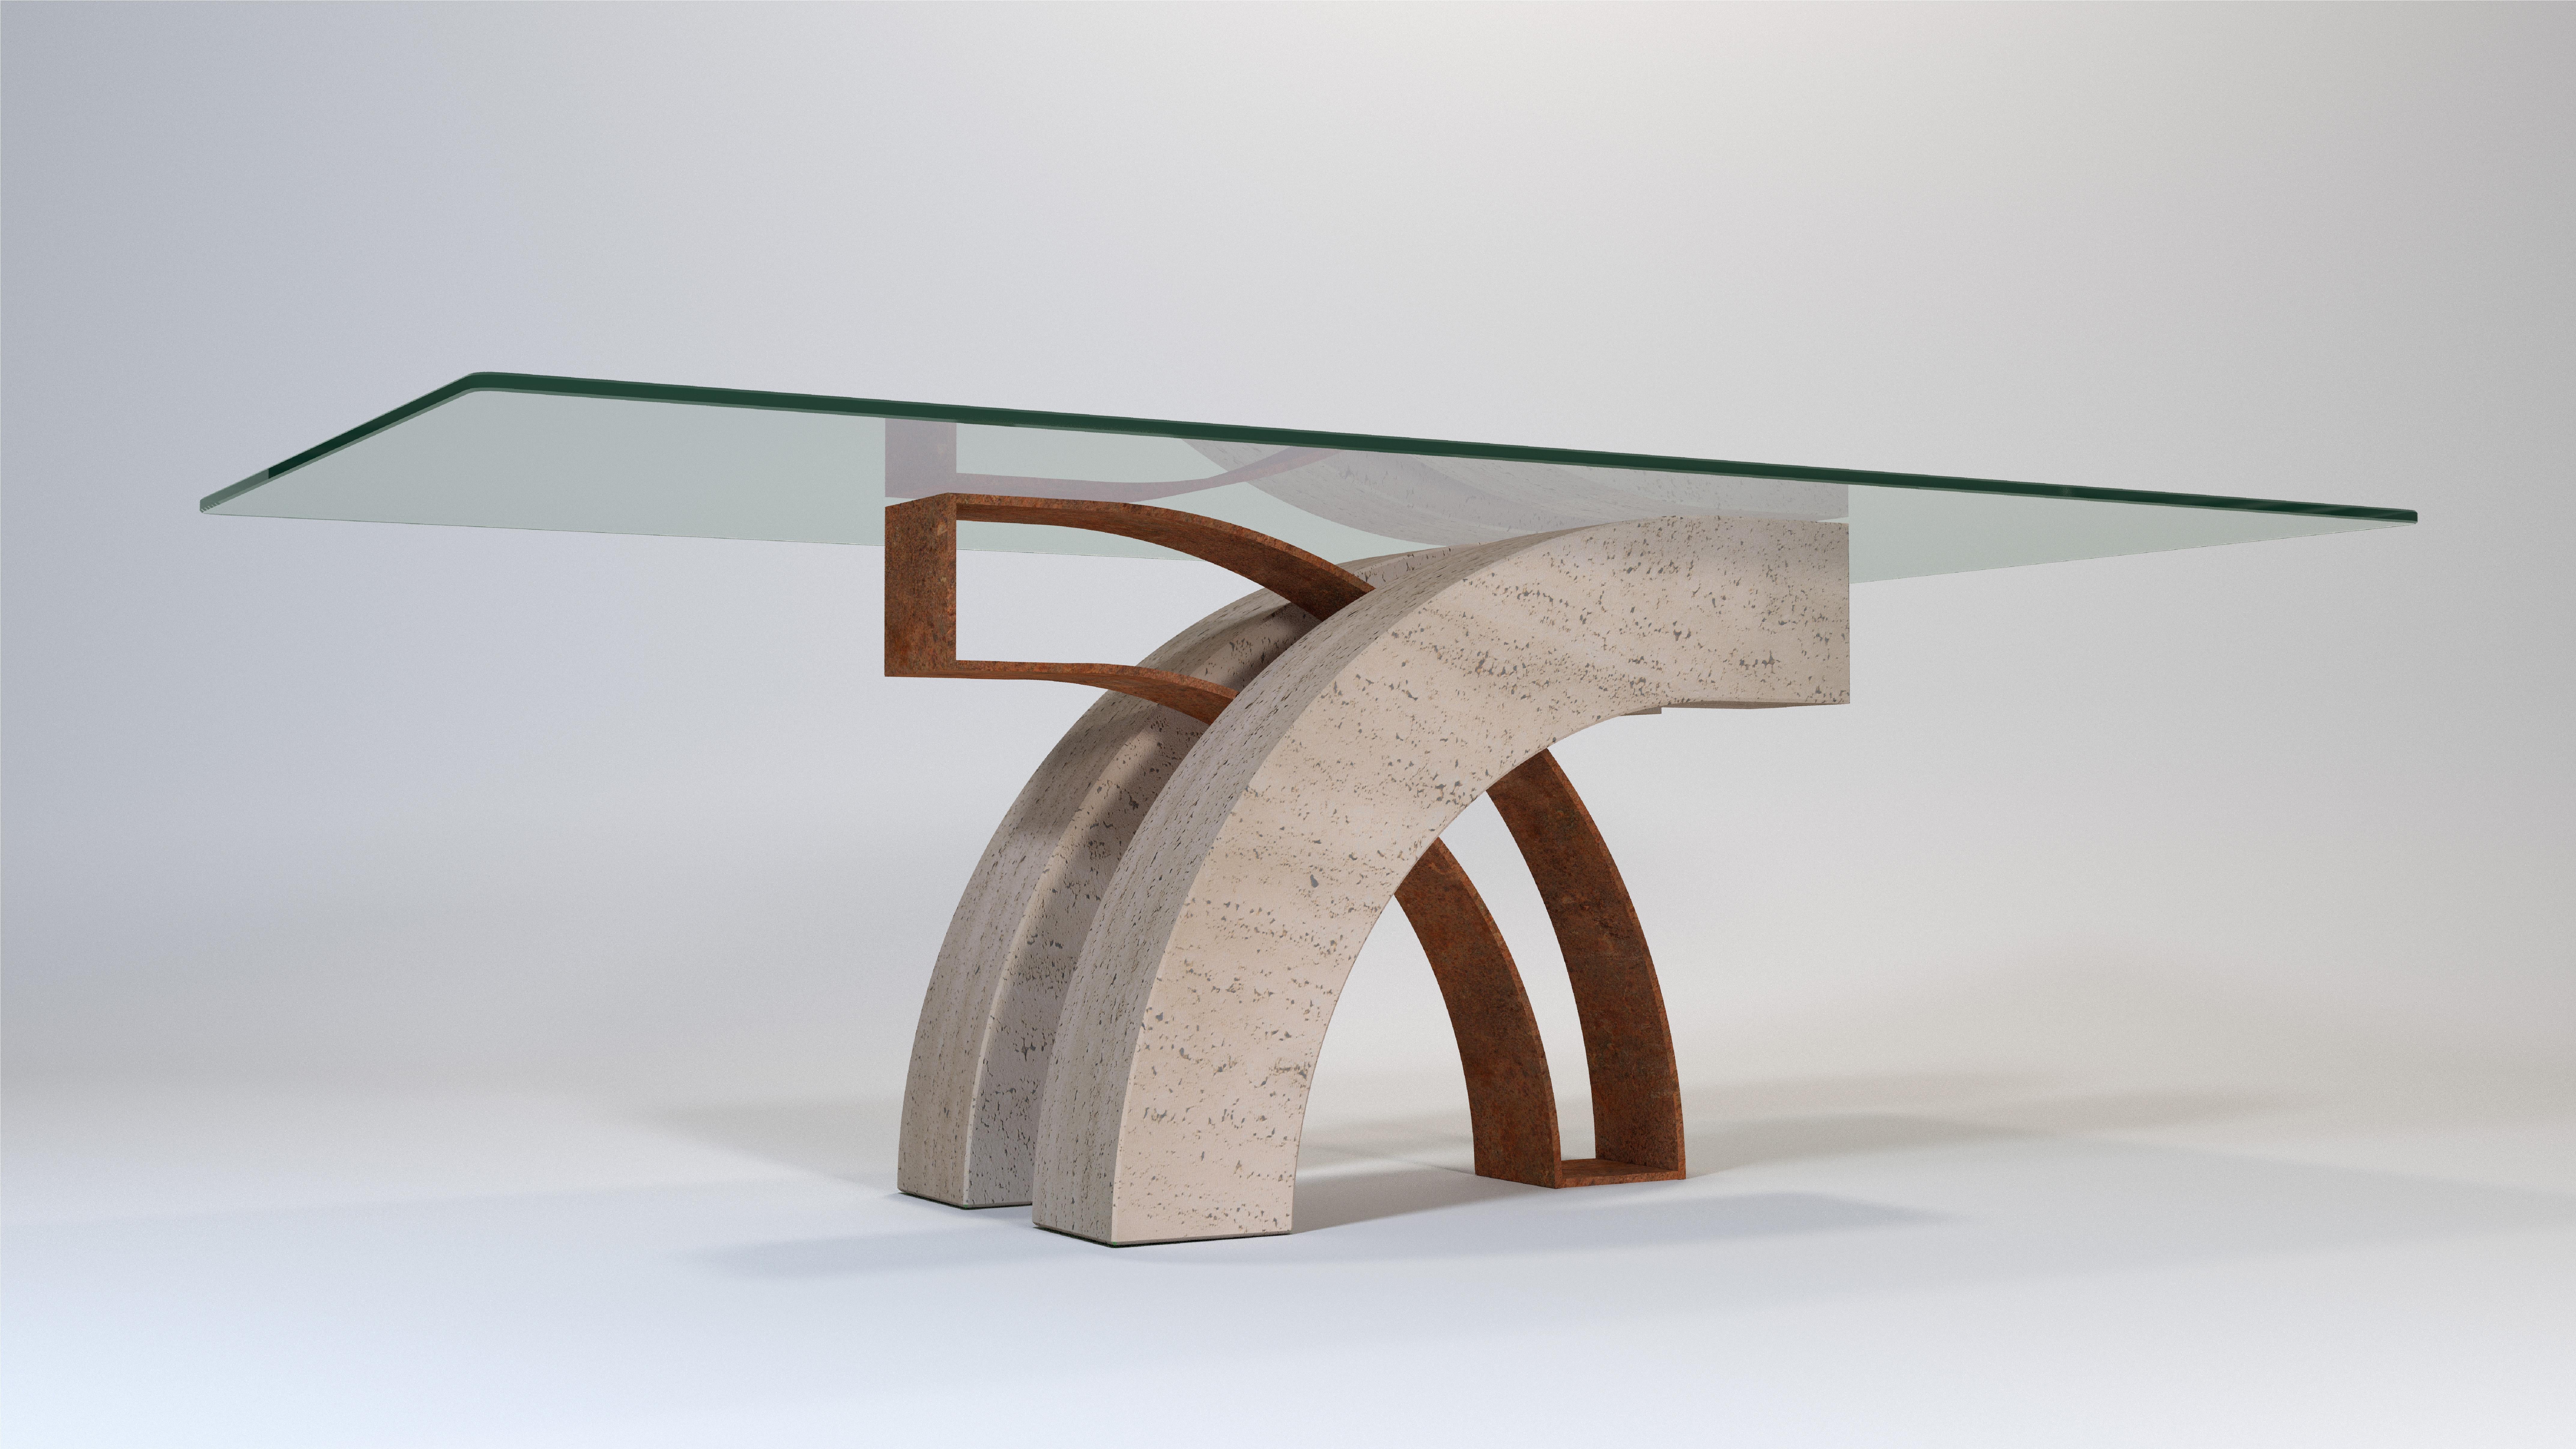 CRESA Travertine Marble Dining Table Limited Edition 1 Joaquín Moll Meddel Spain
Cresa is a designer dining table in natural Roman travertine marble combined with iron in oxide finish. On the surface a transparent glass to show the sculptural